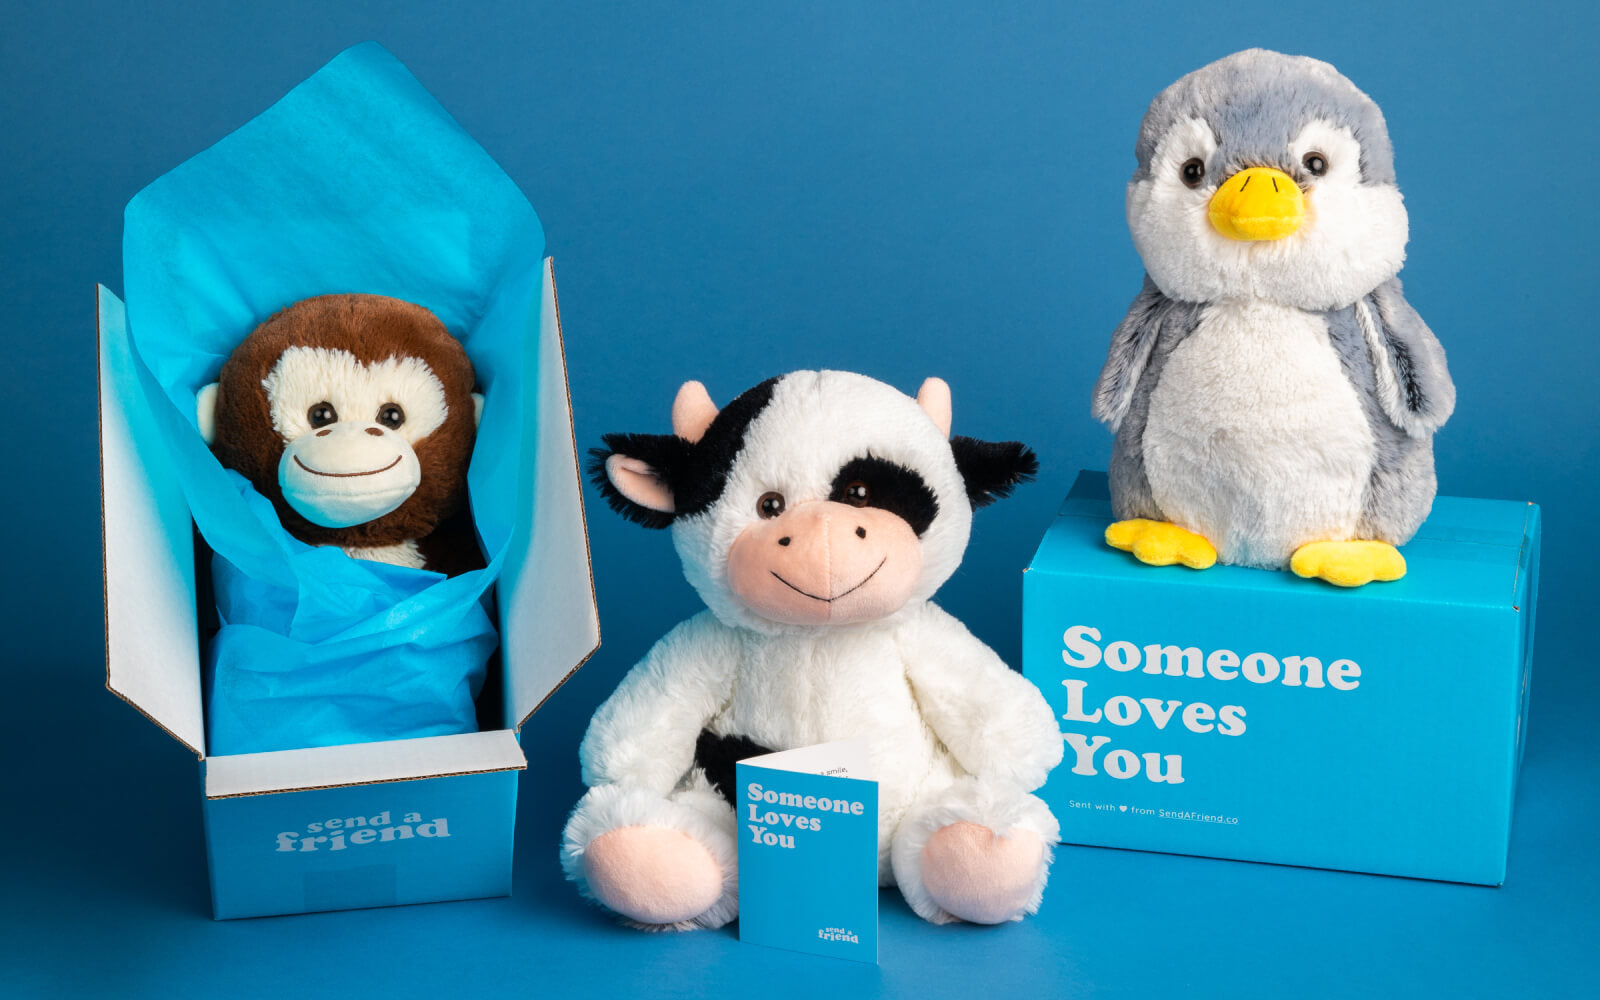 a stuffed monkey, cow, and penguin "someone loves you" care package